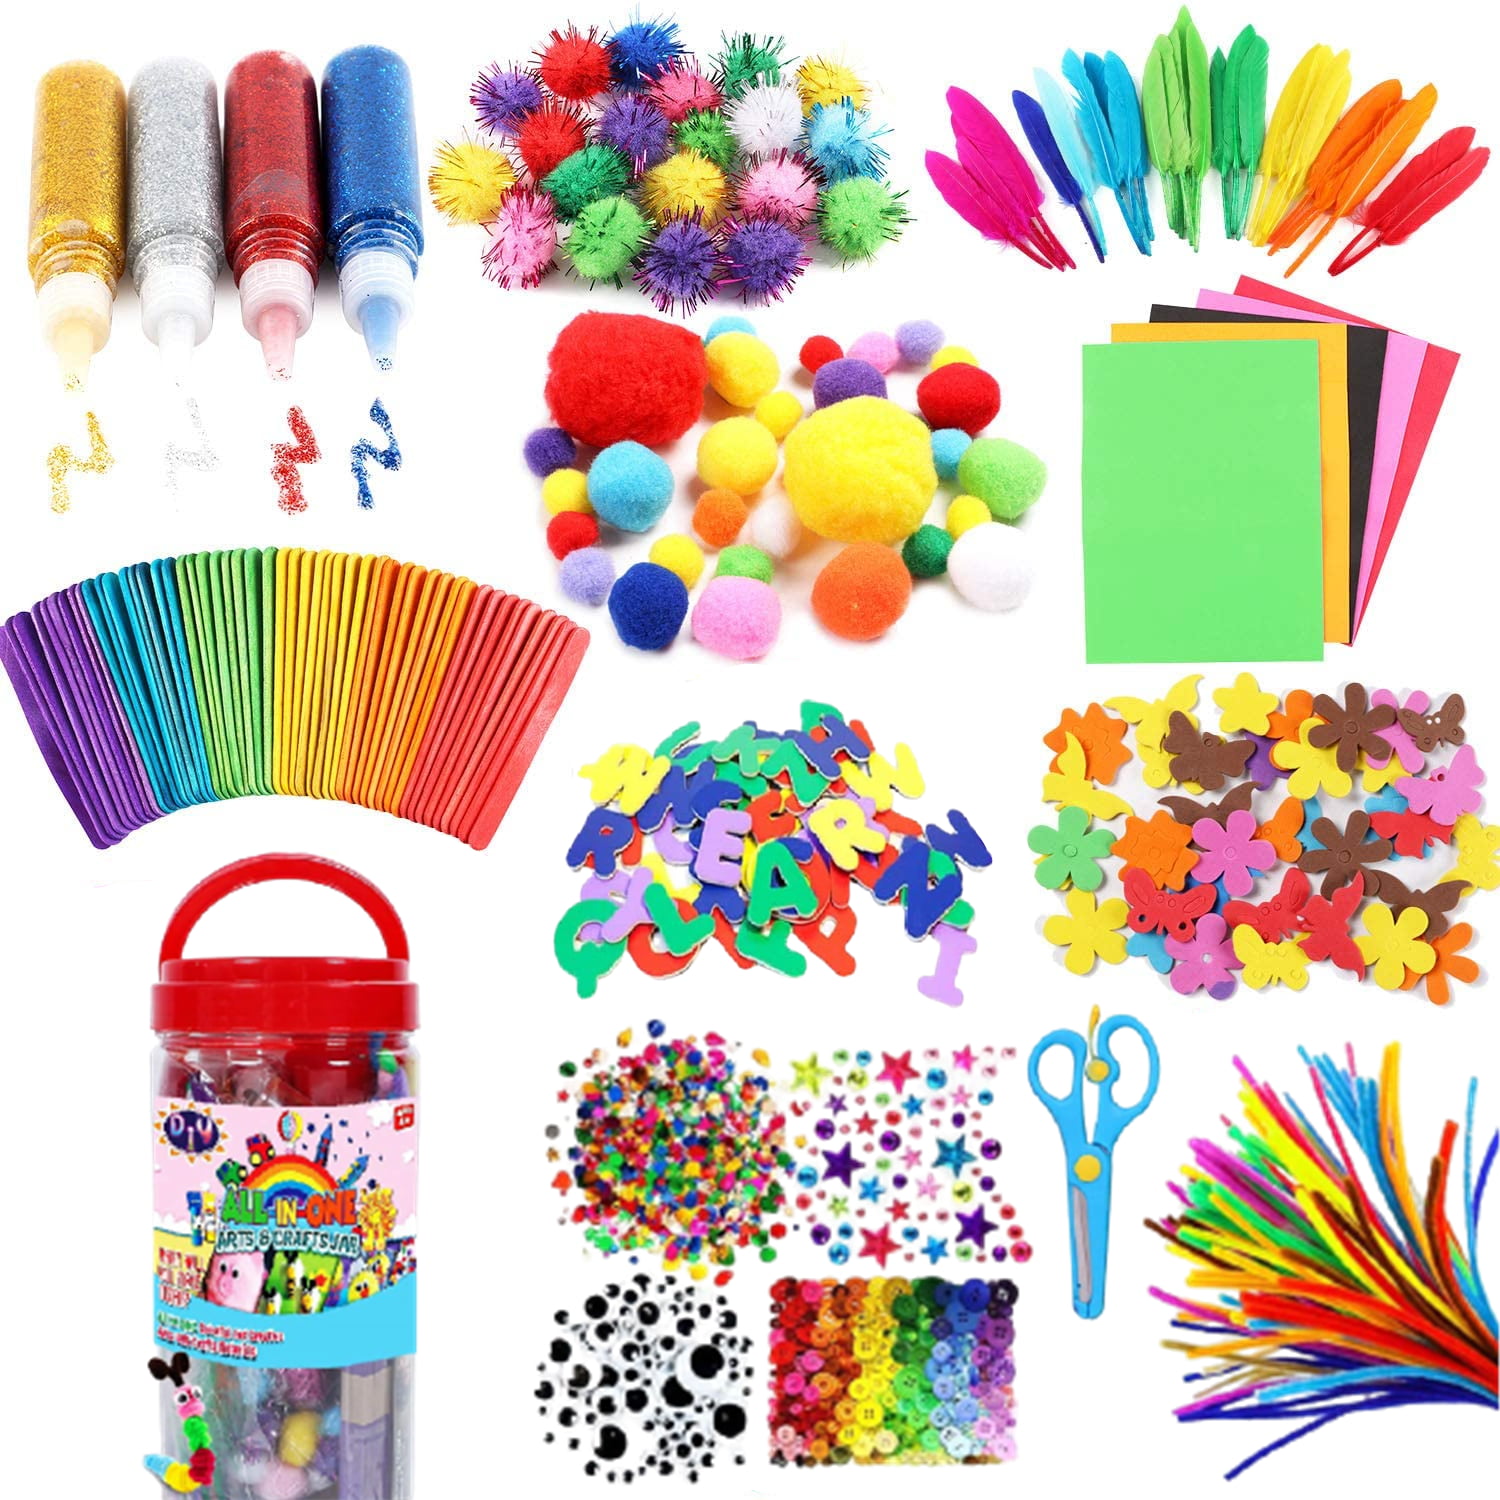 Arts and Crafts Supplies for Kids Craft Art Supply Kit for Toddlers Age 4 5 6 7 8 9 All in One DIY Pipe Cleaners Crafting College Arts Set Bucket for Kids Girls with Storage Box 